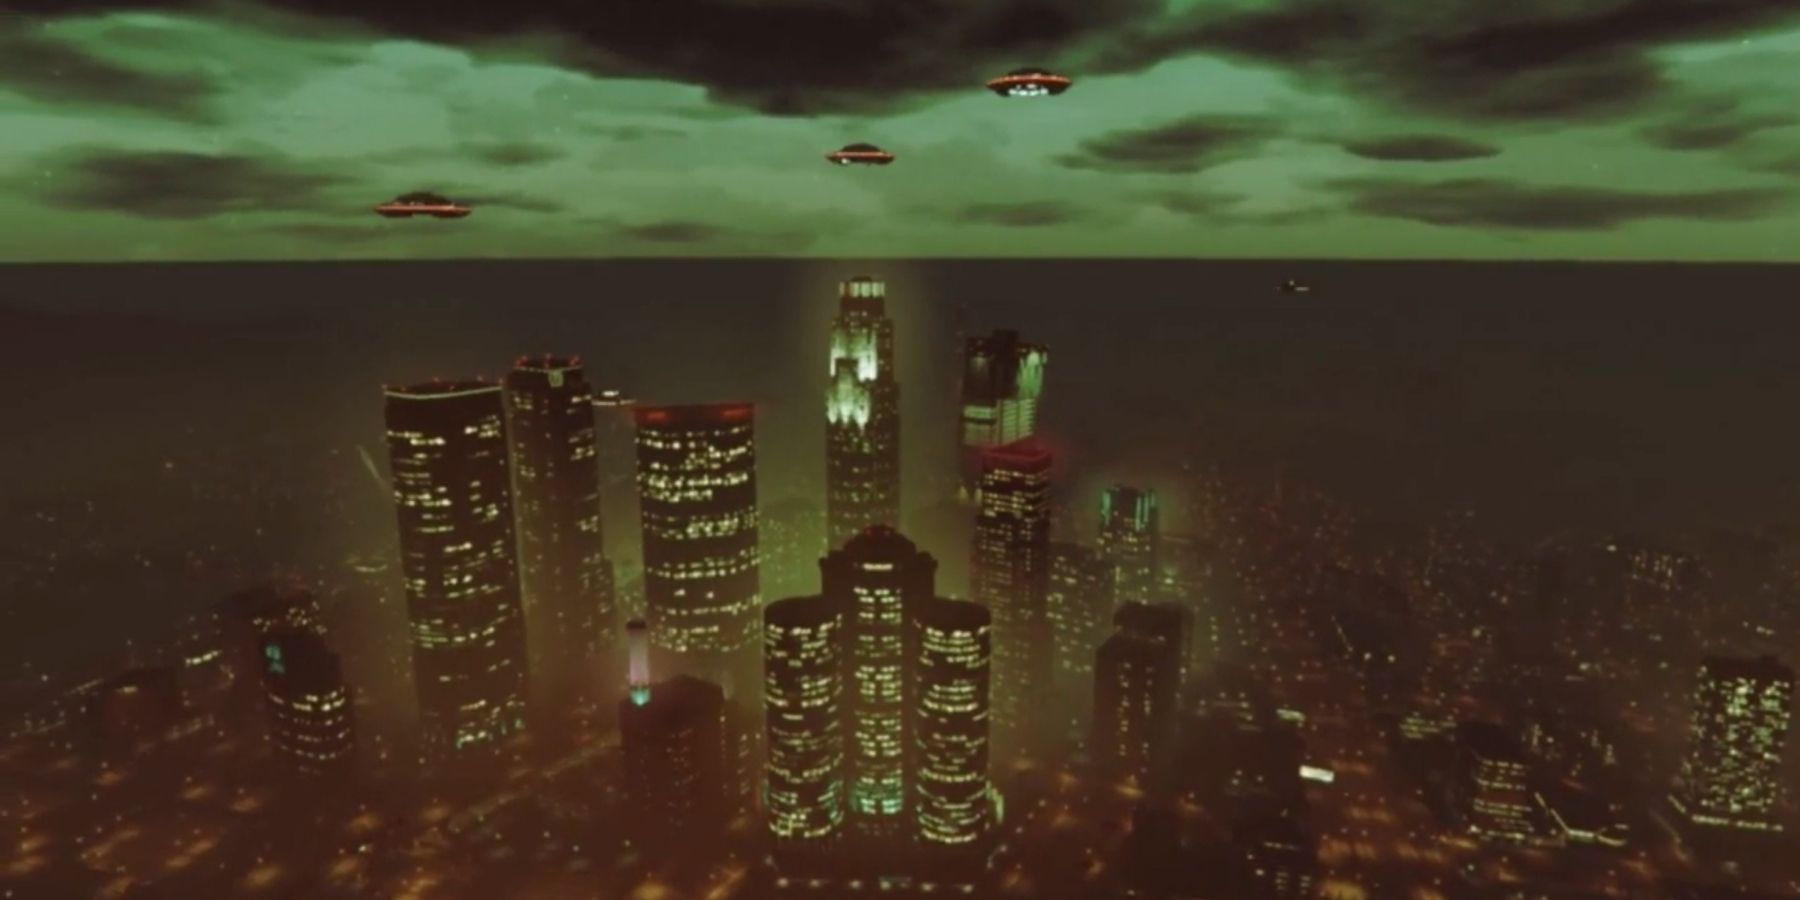 Grand Theft Auto V Evolves From Bigfoot to Aliens in Halloween Showdown